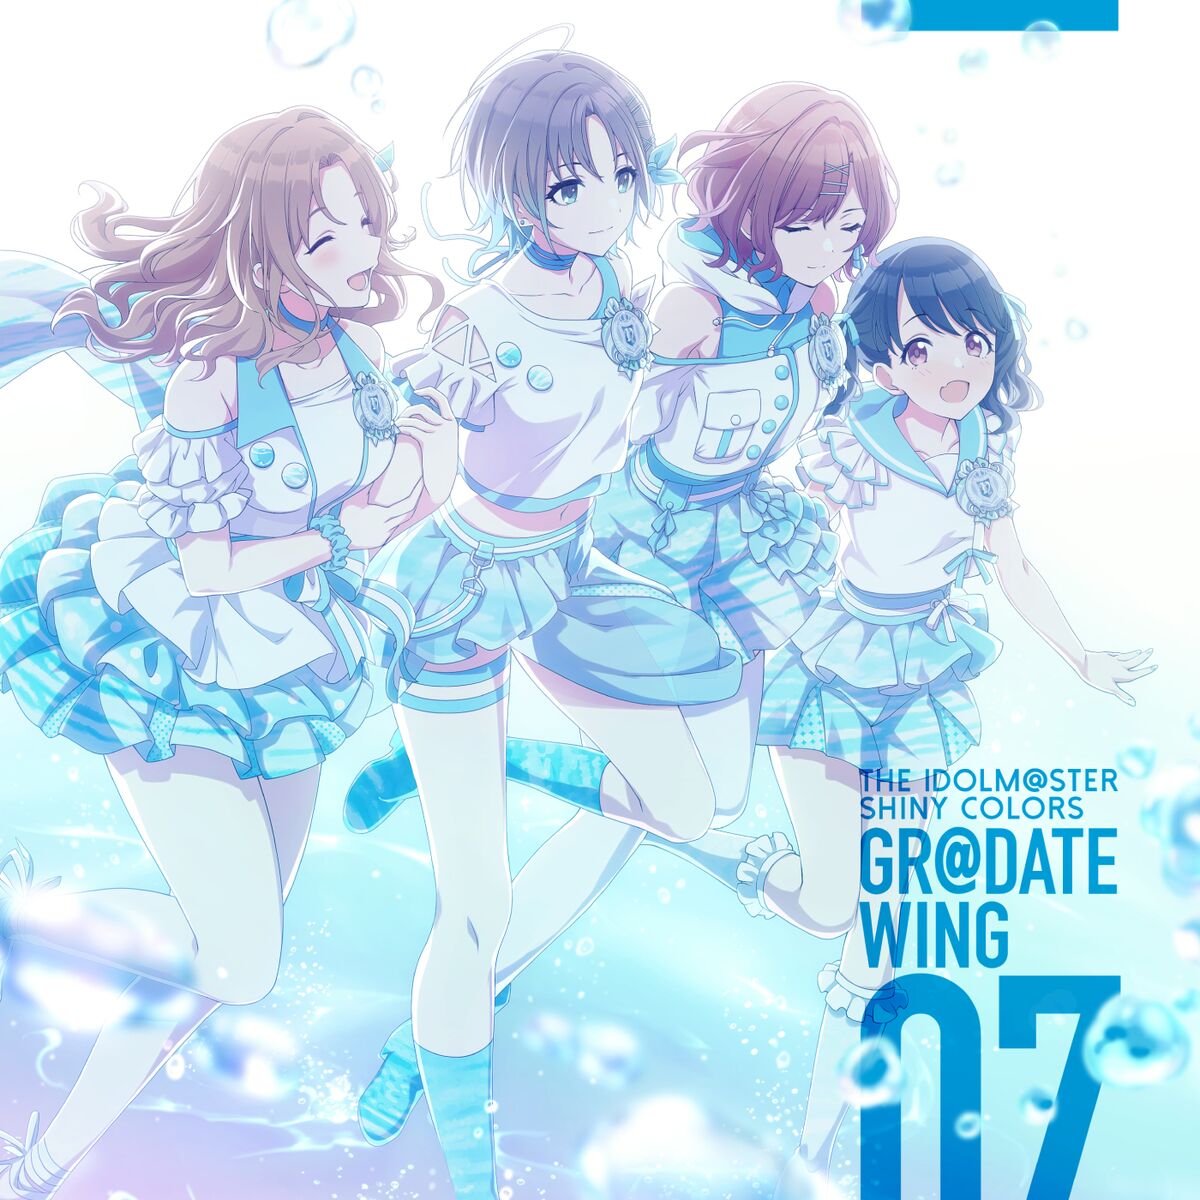 THE IDOLM@STER SHINY COLORS GR@DATE WING 07 - Shinycolors Wiki